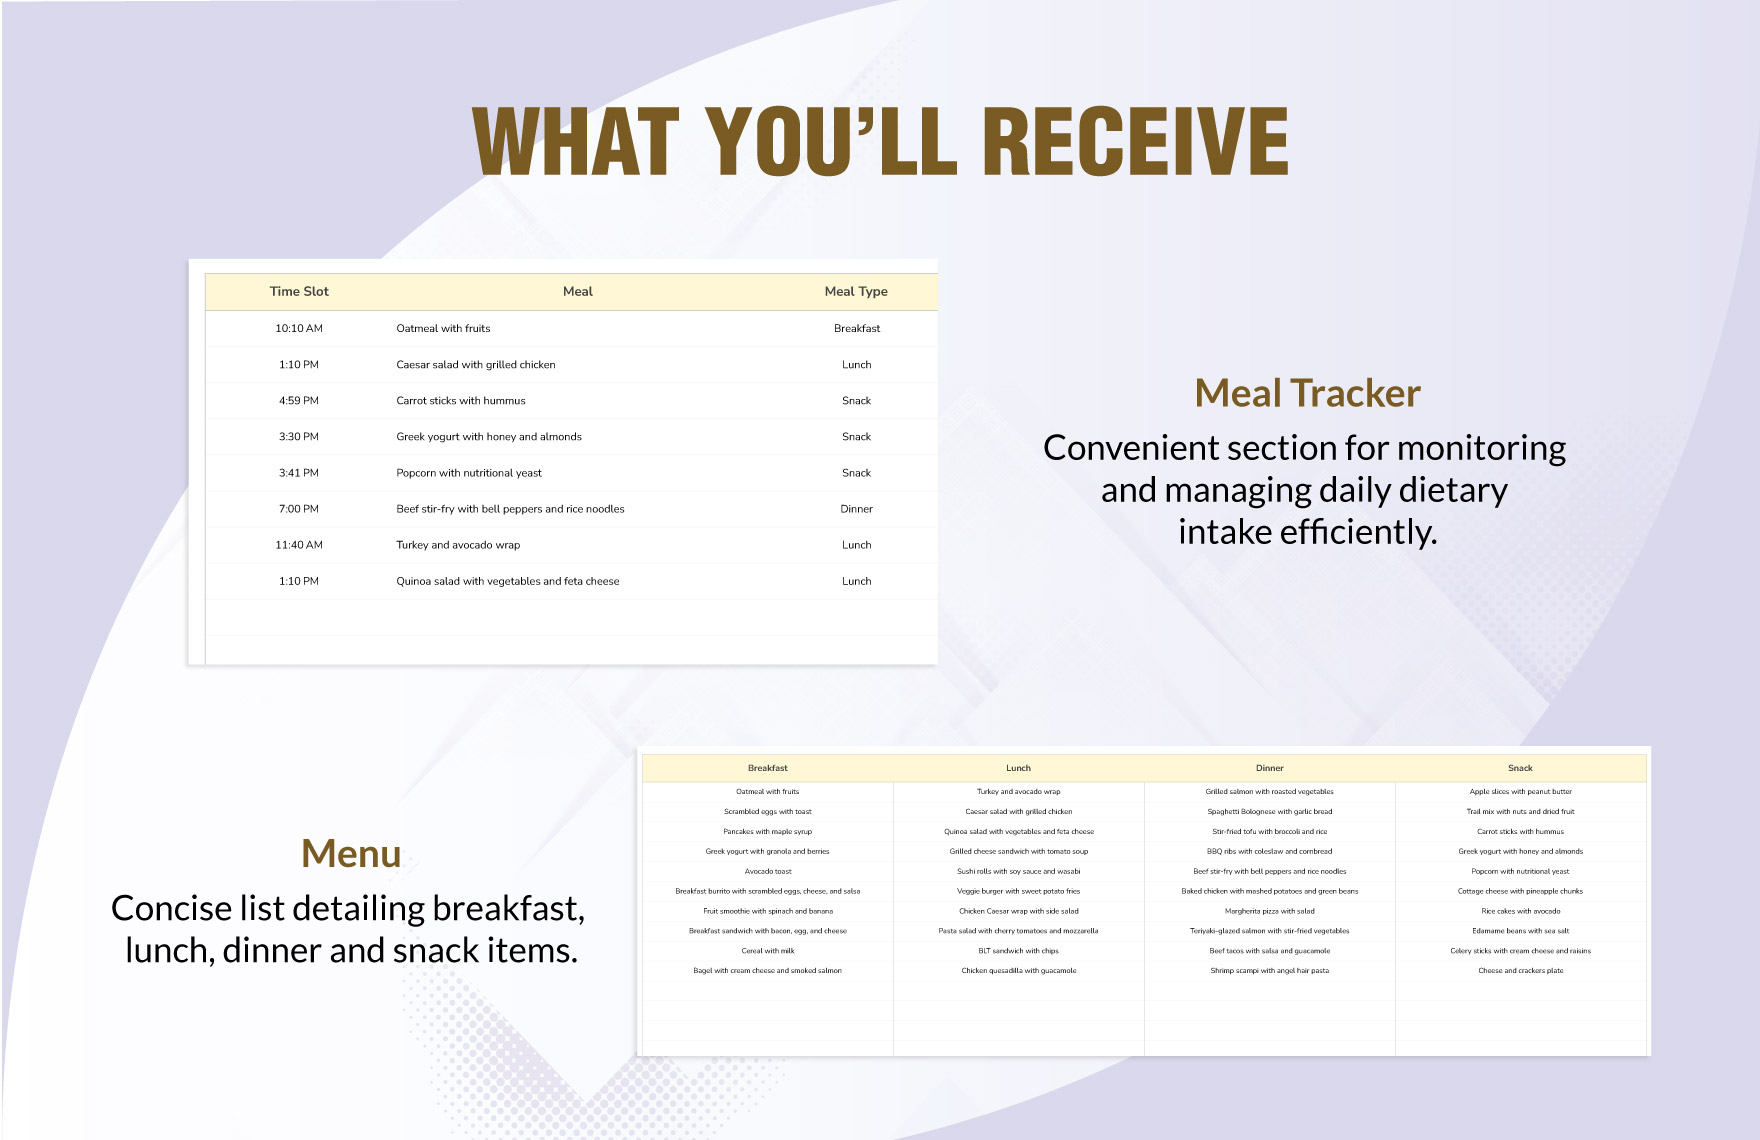 Aesthetic Meal Plan Template